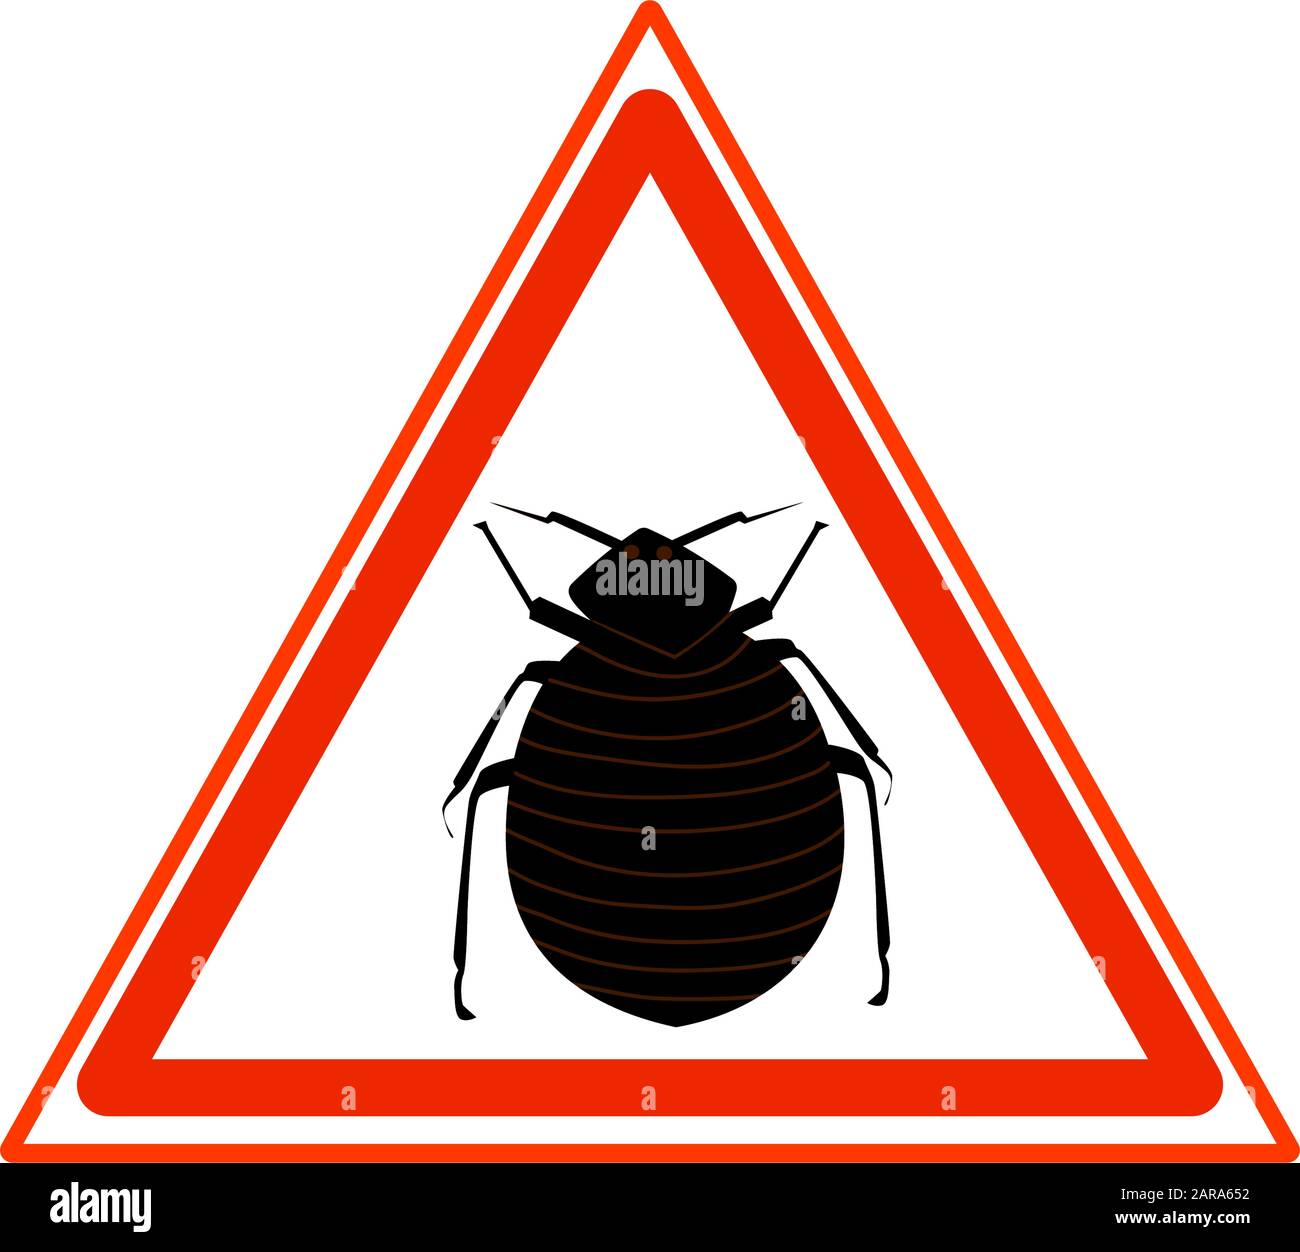 Flea warning sign on a white background. Symbol of protection against parasites. Design of danger flea symbol. Pest insect control service. Vector Stock Vector